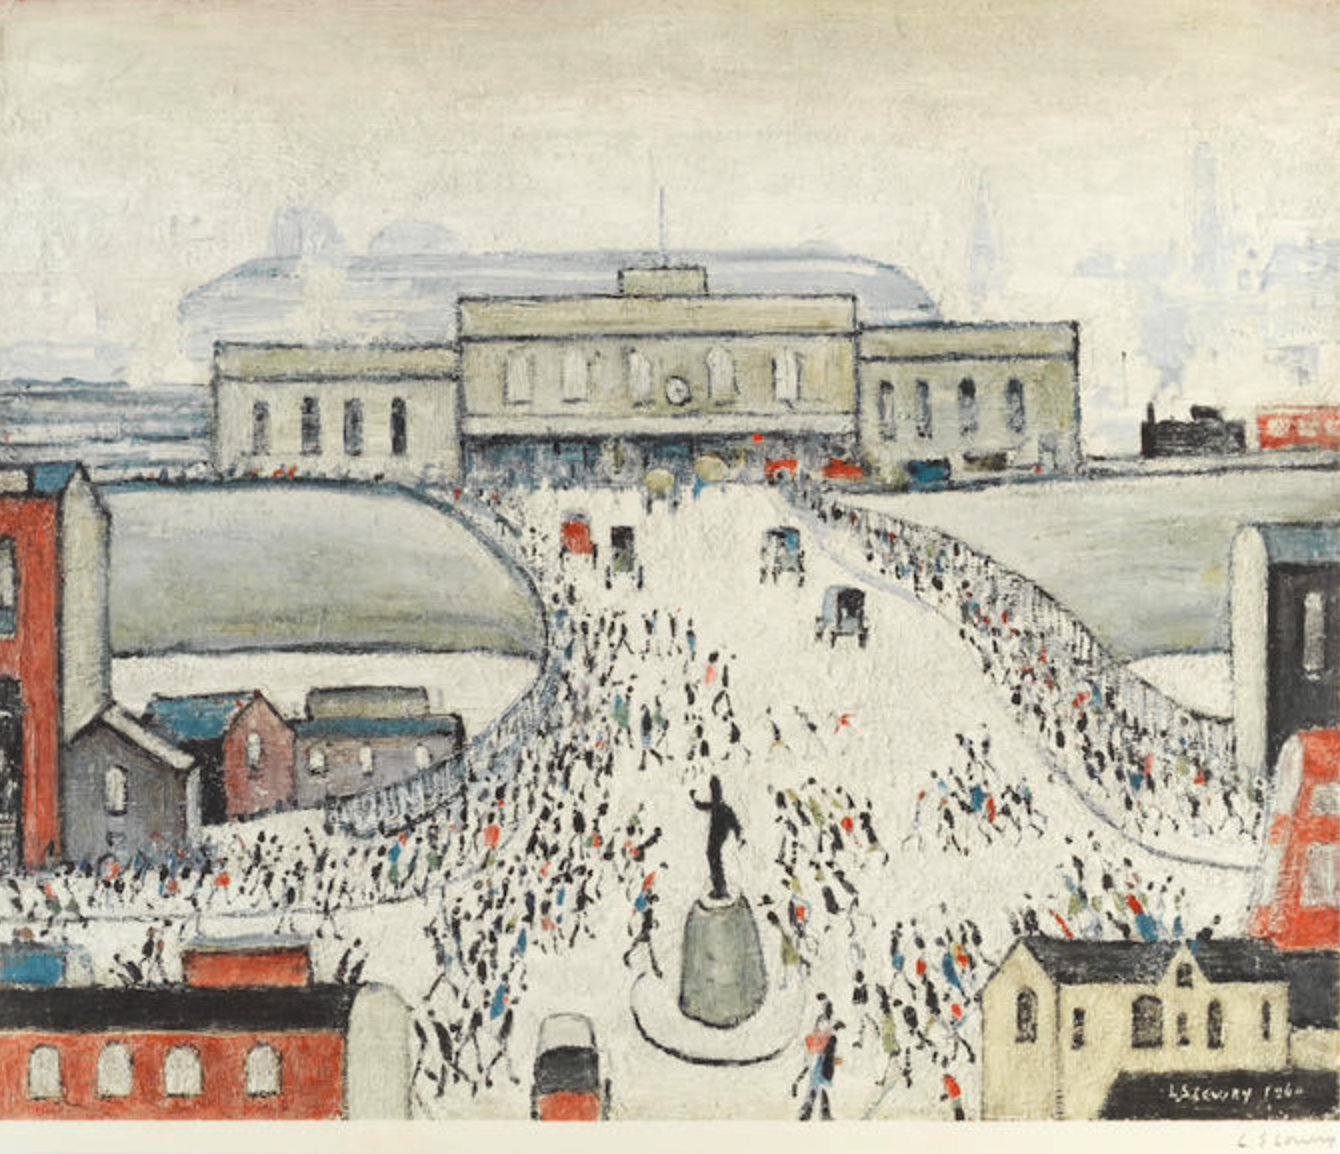 Station Approach (Date unknown) by Laurence Stephen Lowry (1887 - 1976), English artist.